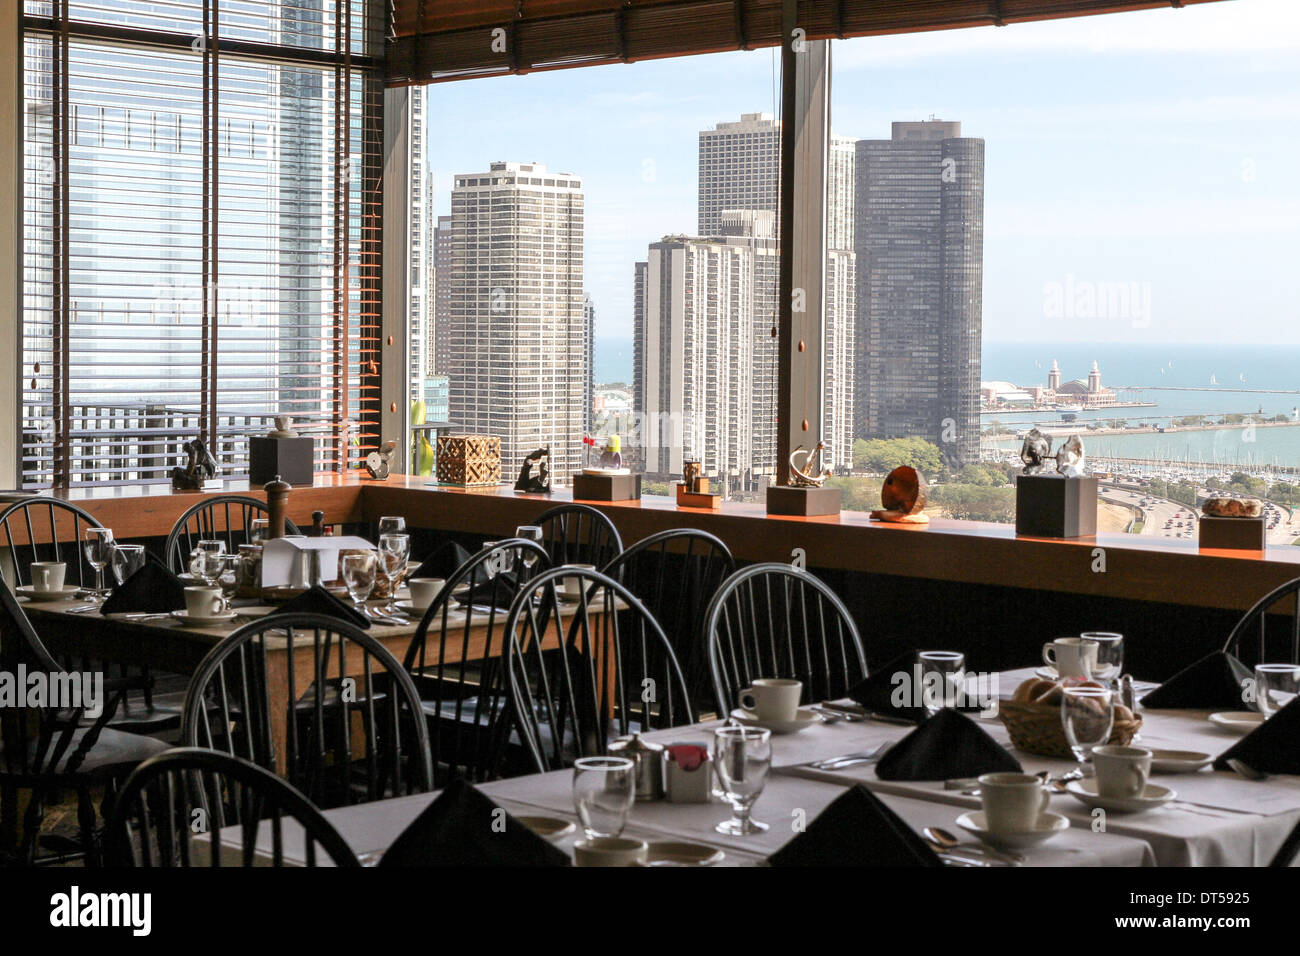 Looking over the tables of the Cliff Dwellers Club towards skyscrapers and Lake Michigan, Chicago Stock Photo